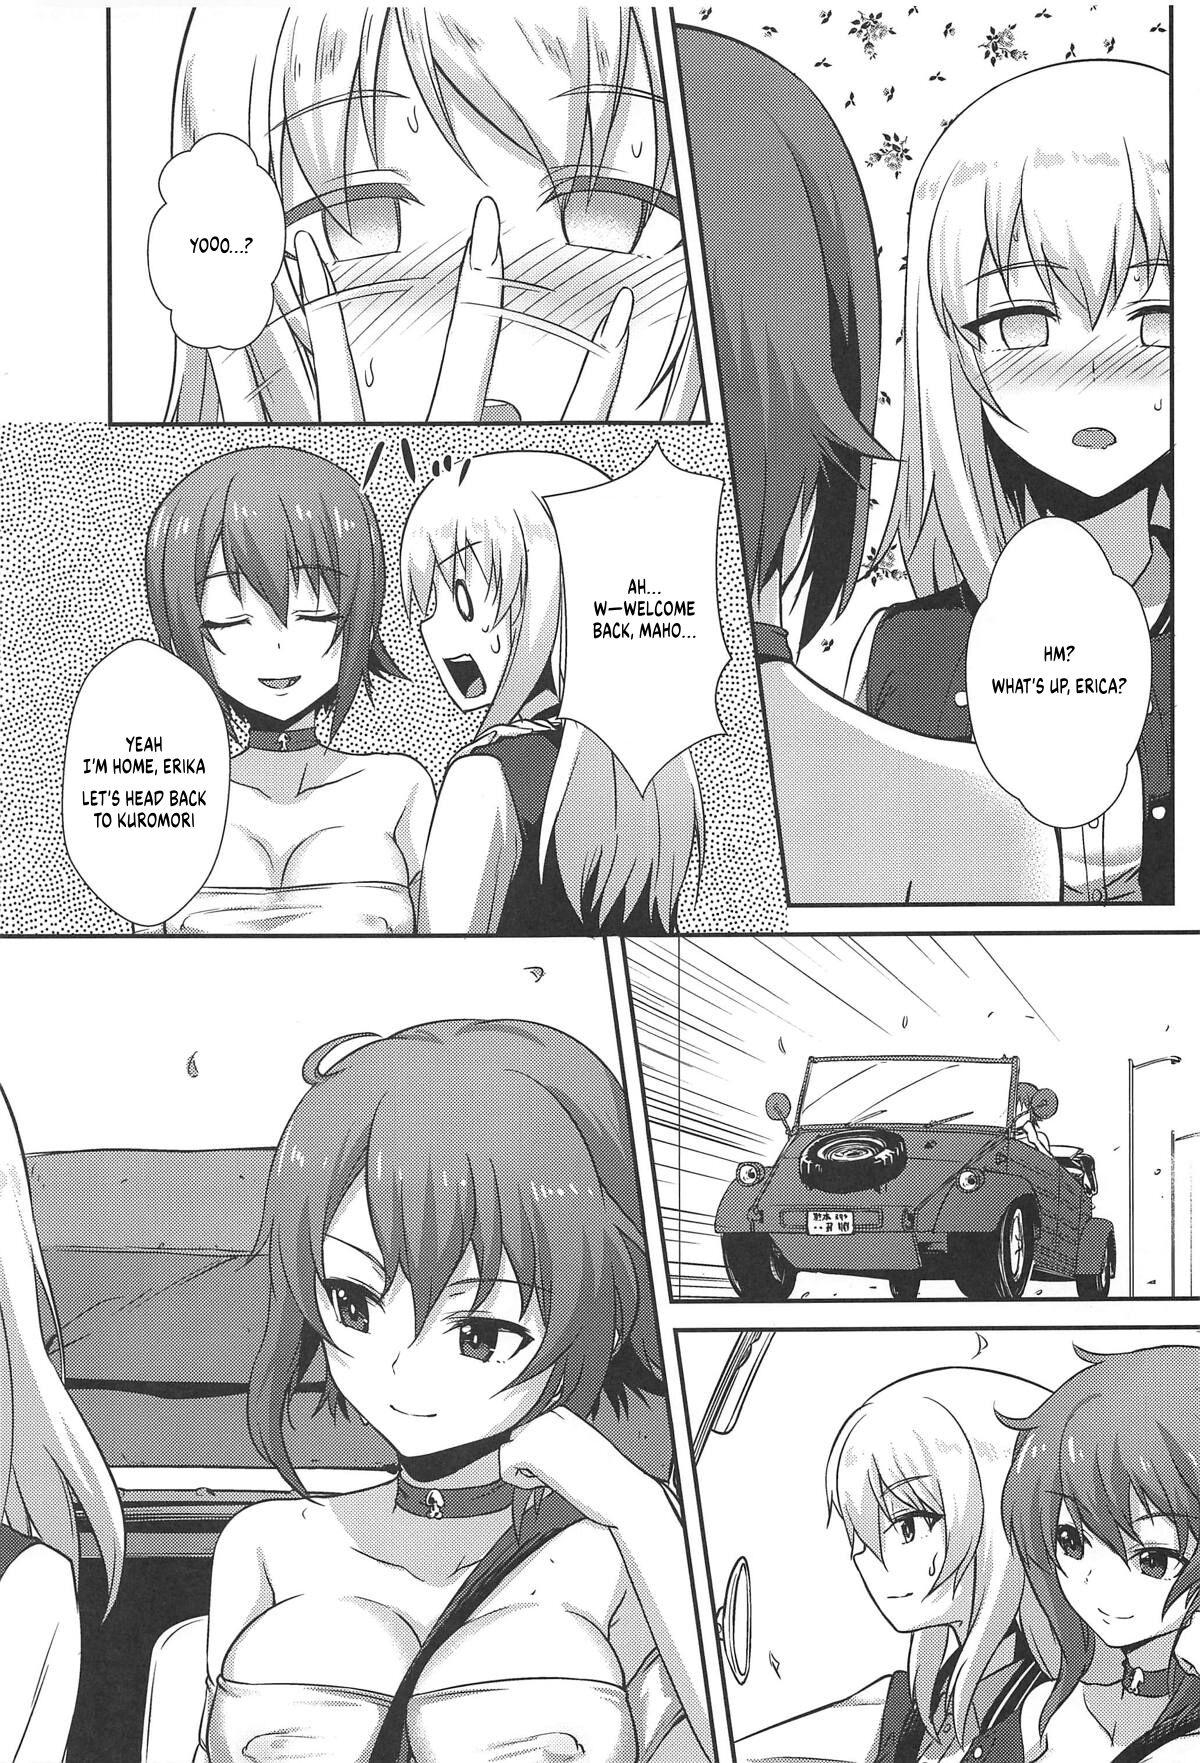 Music The Way How a Matriarch is Brought Up - Maho's Case, Bottom - Girls und panzer Leather - Page 7